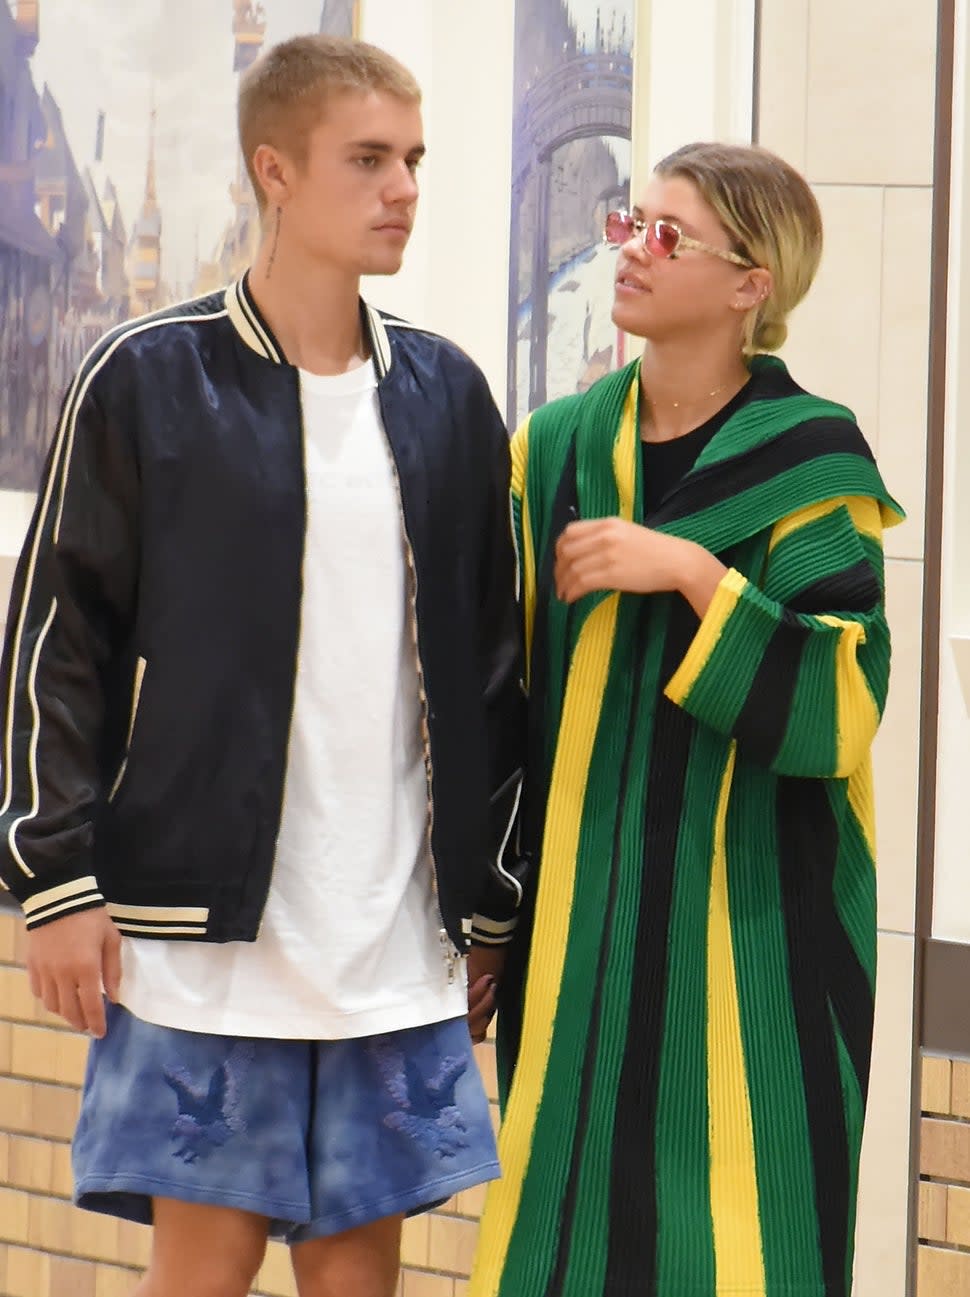 Justin Bieber and Sofia Richie are seen at Yaesu shopping mall on Aug. 14, 2016 in Tokyo, Japan. 